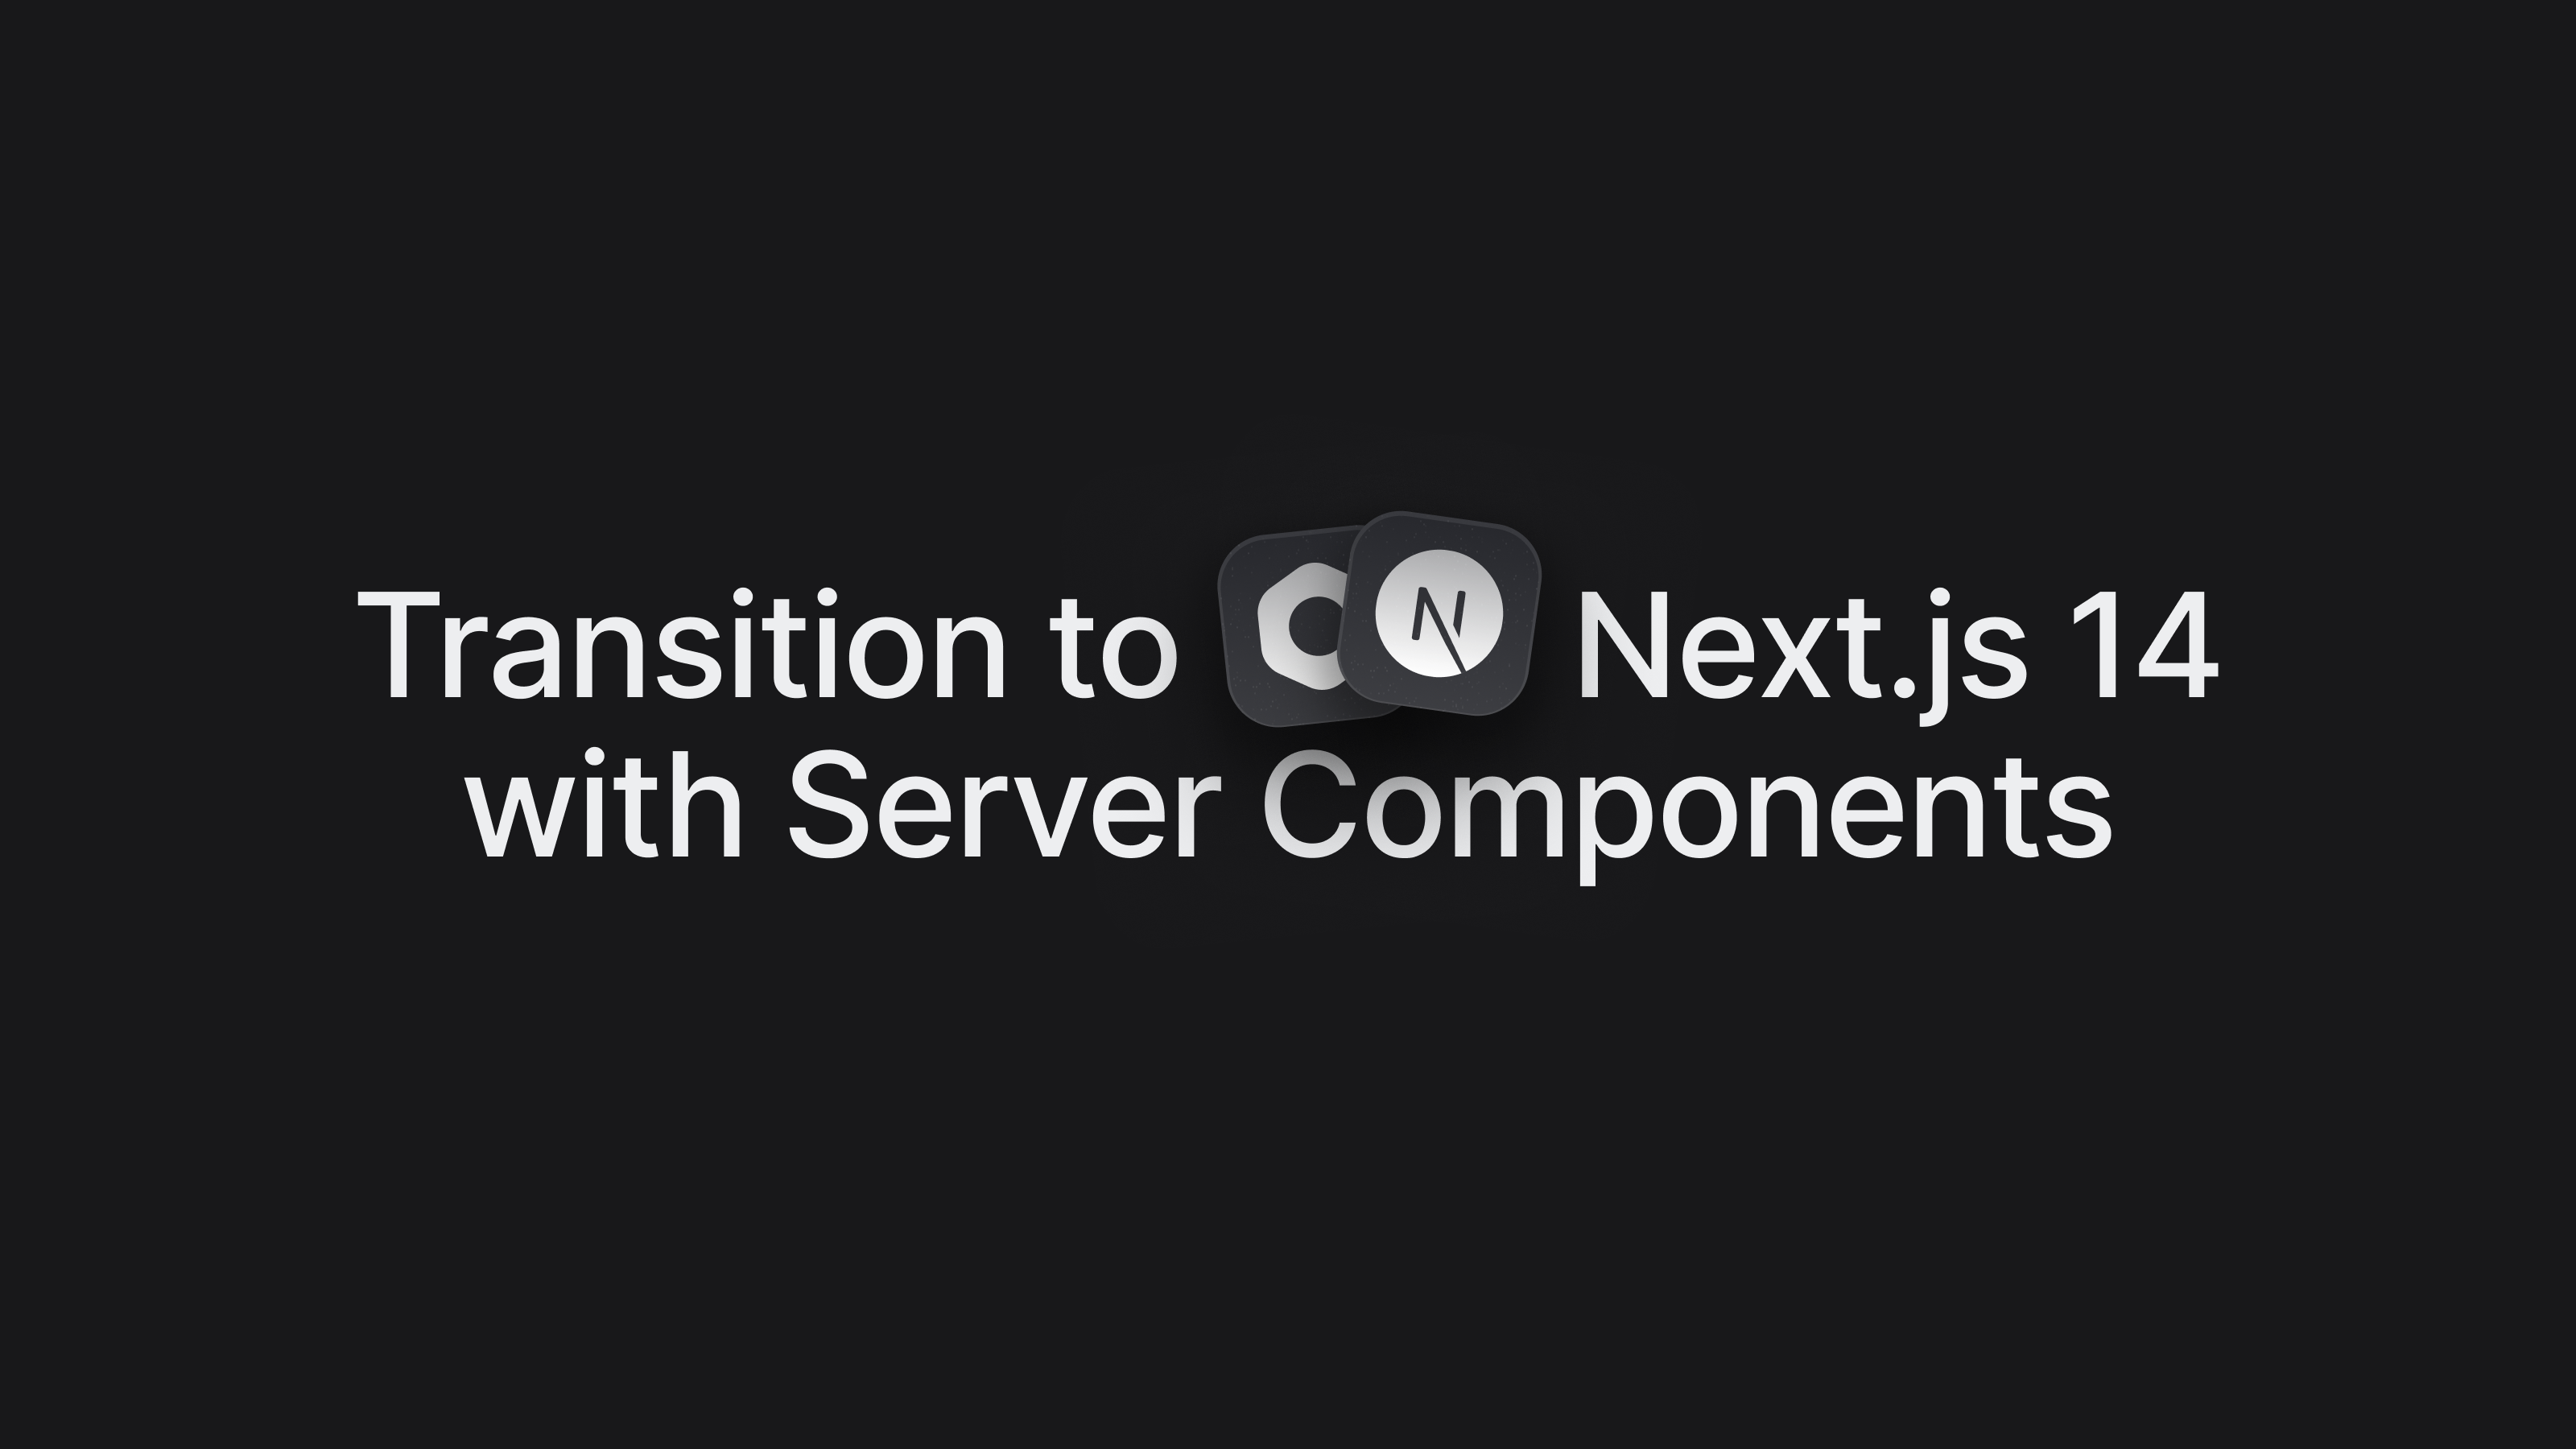 Transition to Next.js 14 with Server Components